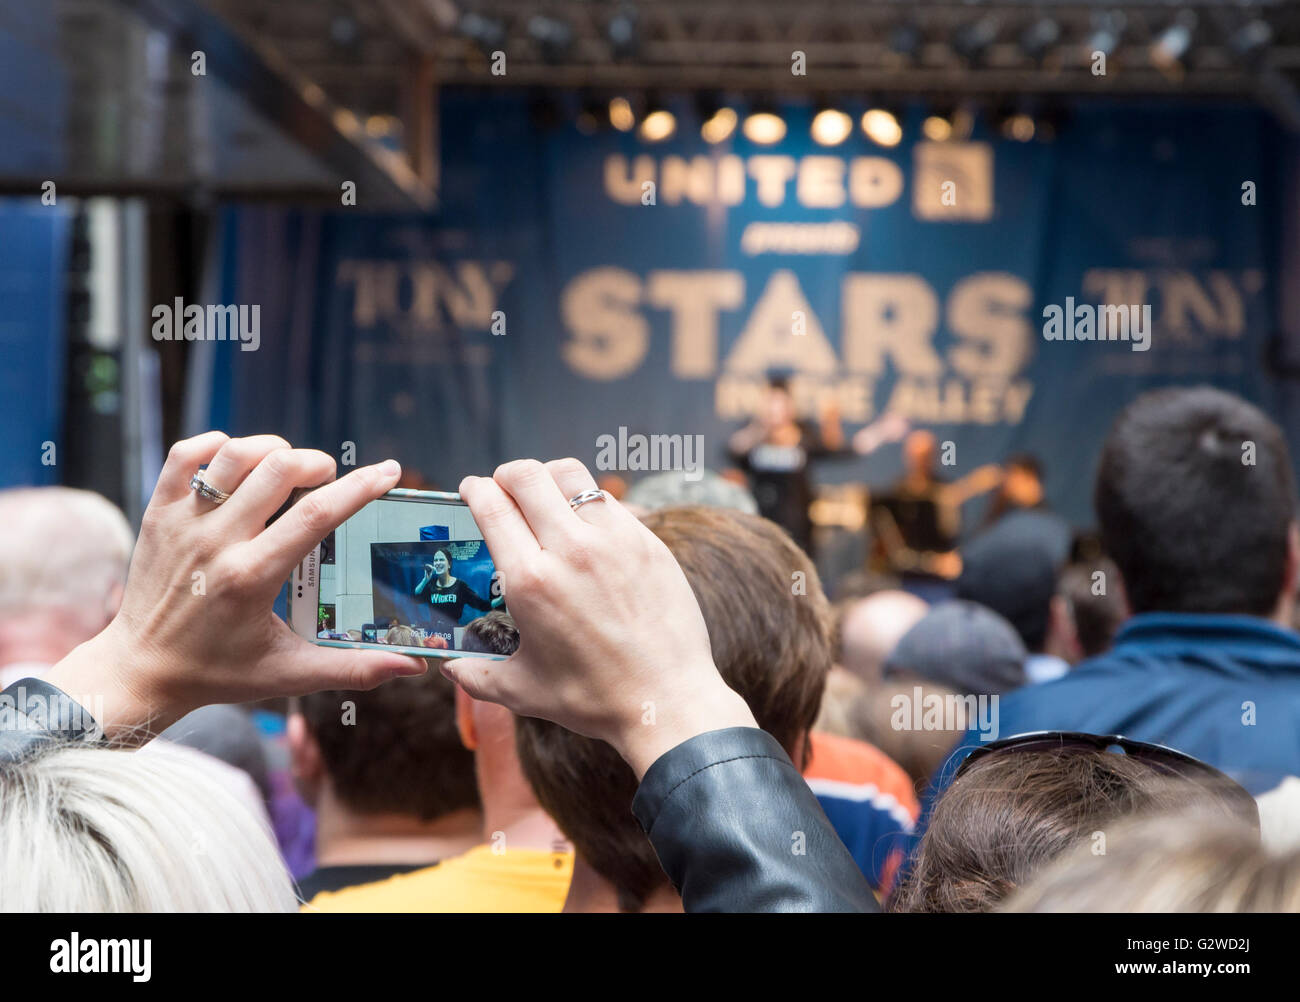 Woman recording a performance of a song from the musical Wicked on her mobile phone at the free Stars in the Alley concert on Broadway, New York. Shallow depth of field with focus on the phone screen. Stock Photo